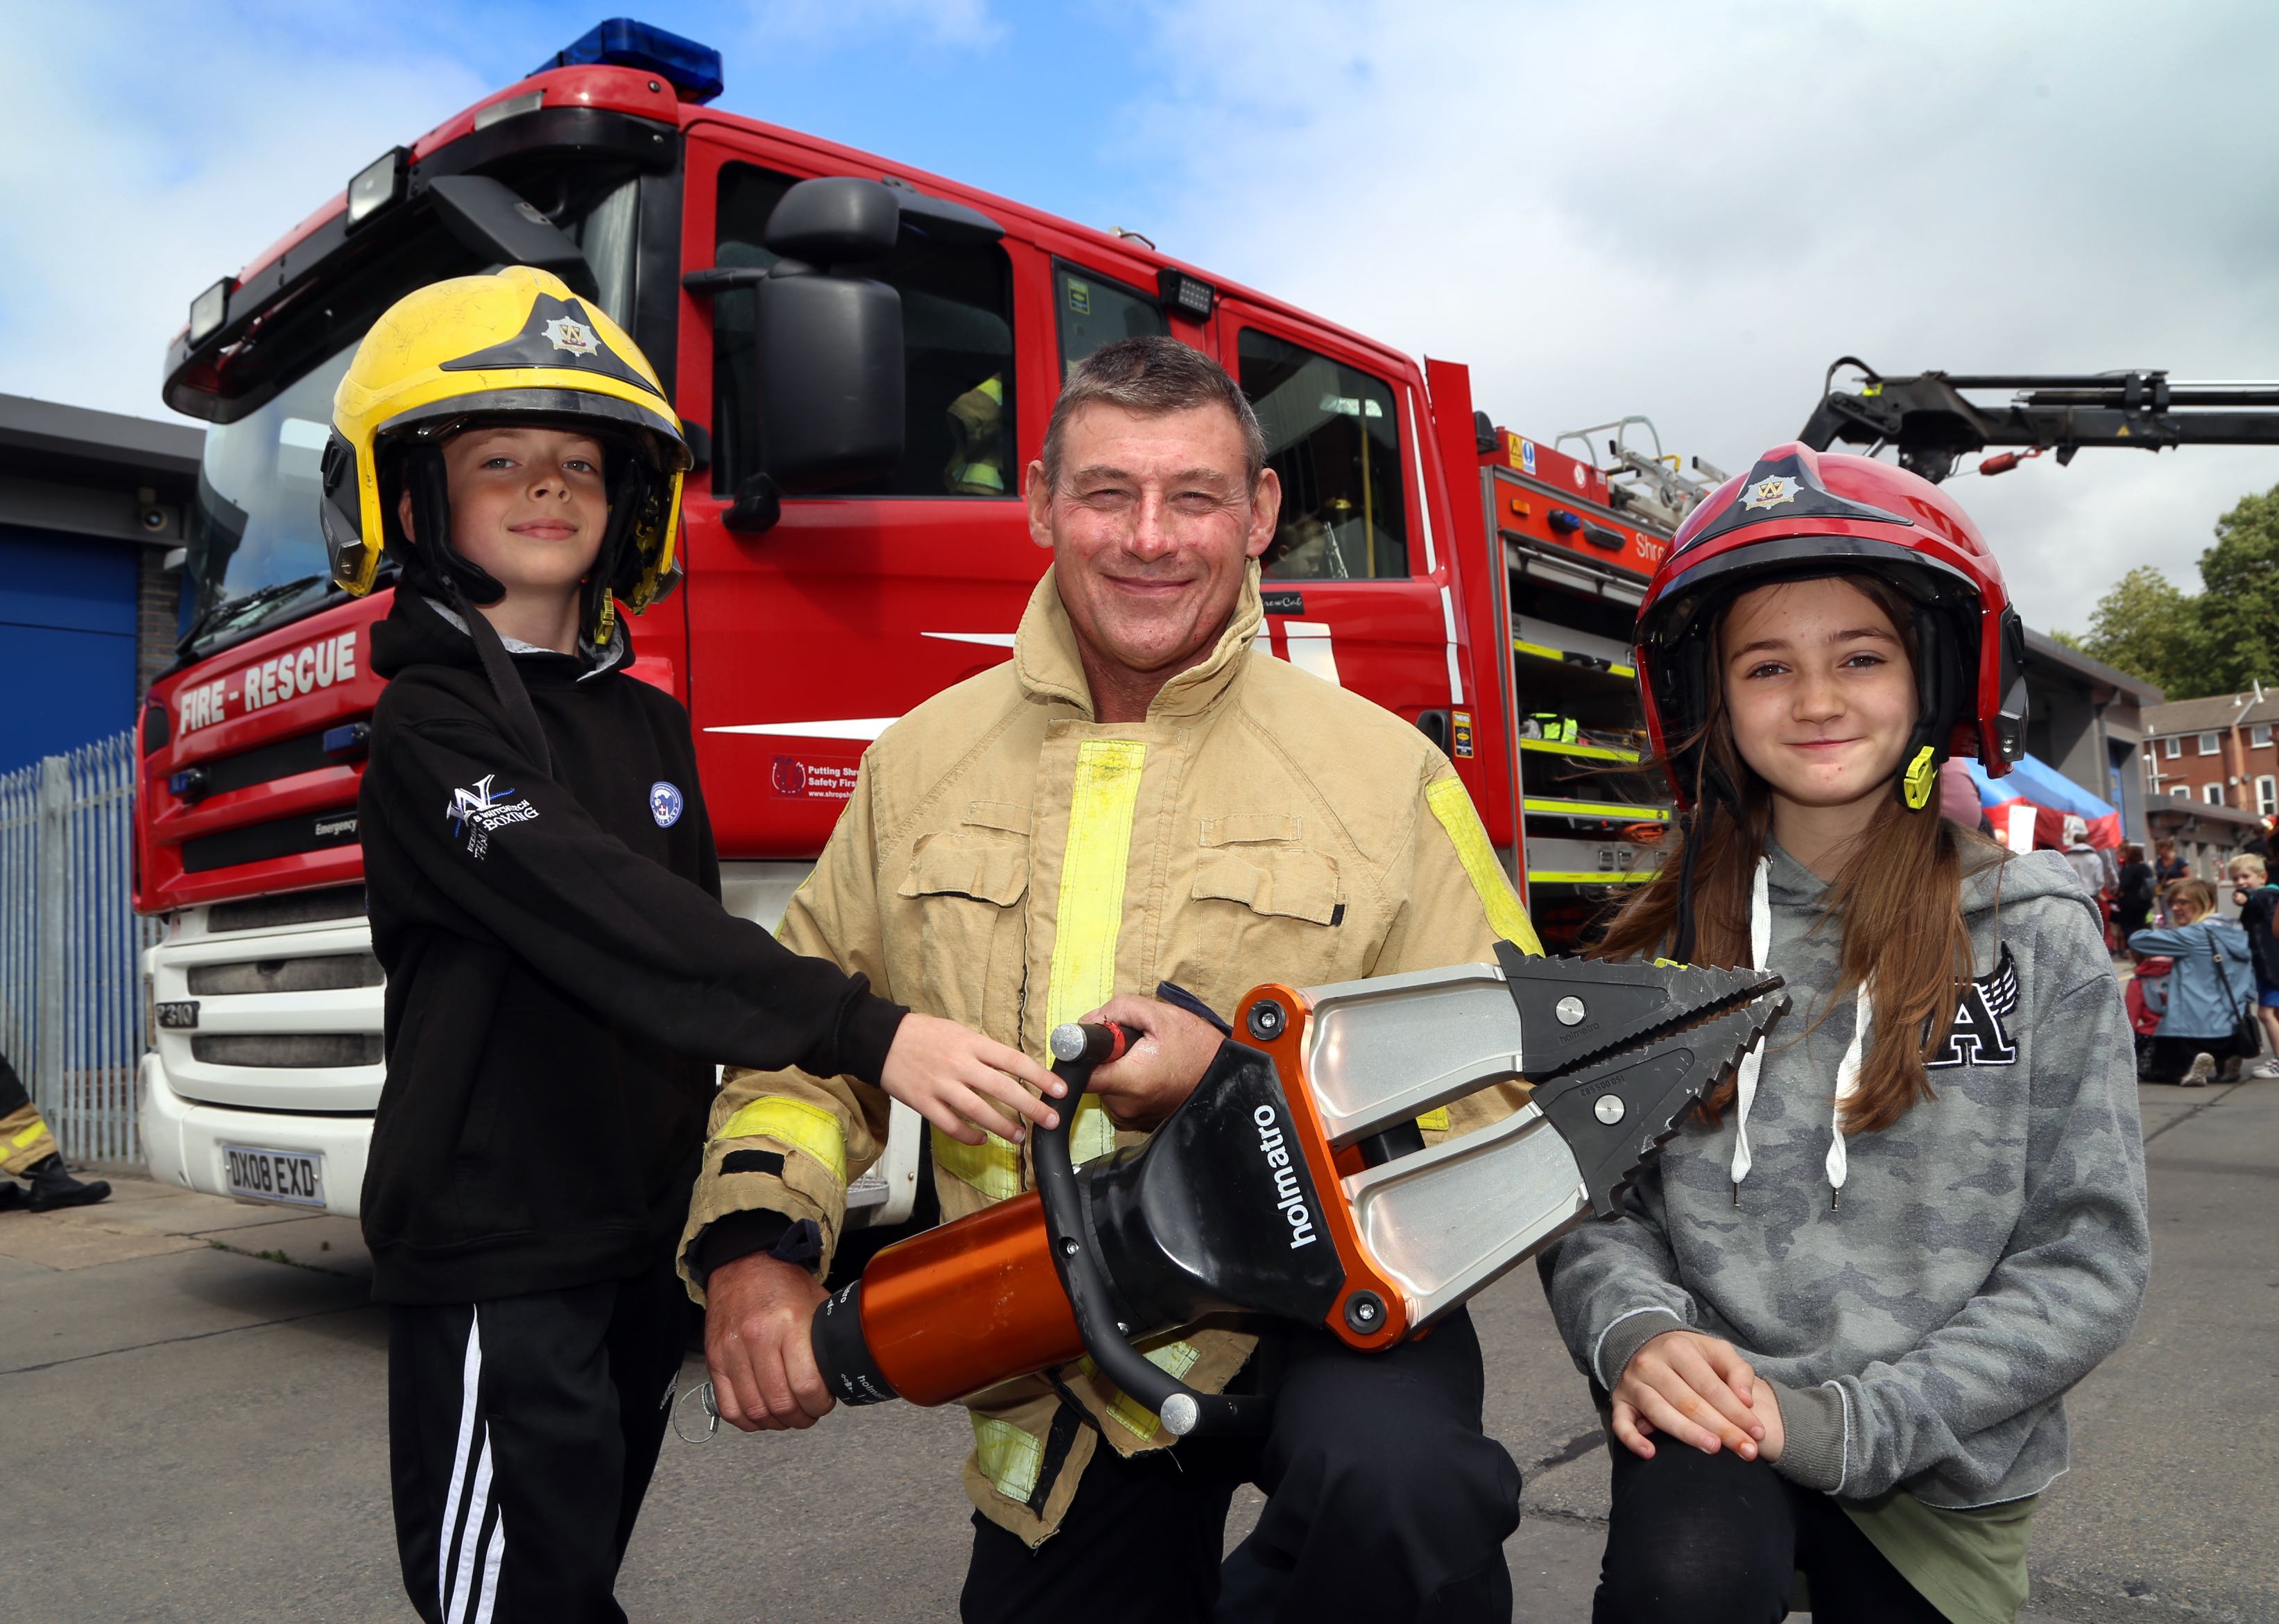 Firefighter Chris Davey shows Joe Sheridan (9) and Tabitha Bridgman (12) the special cutters used to rescue people from road traffic collisions.